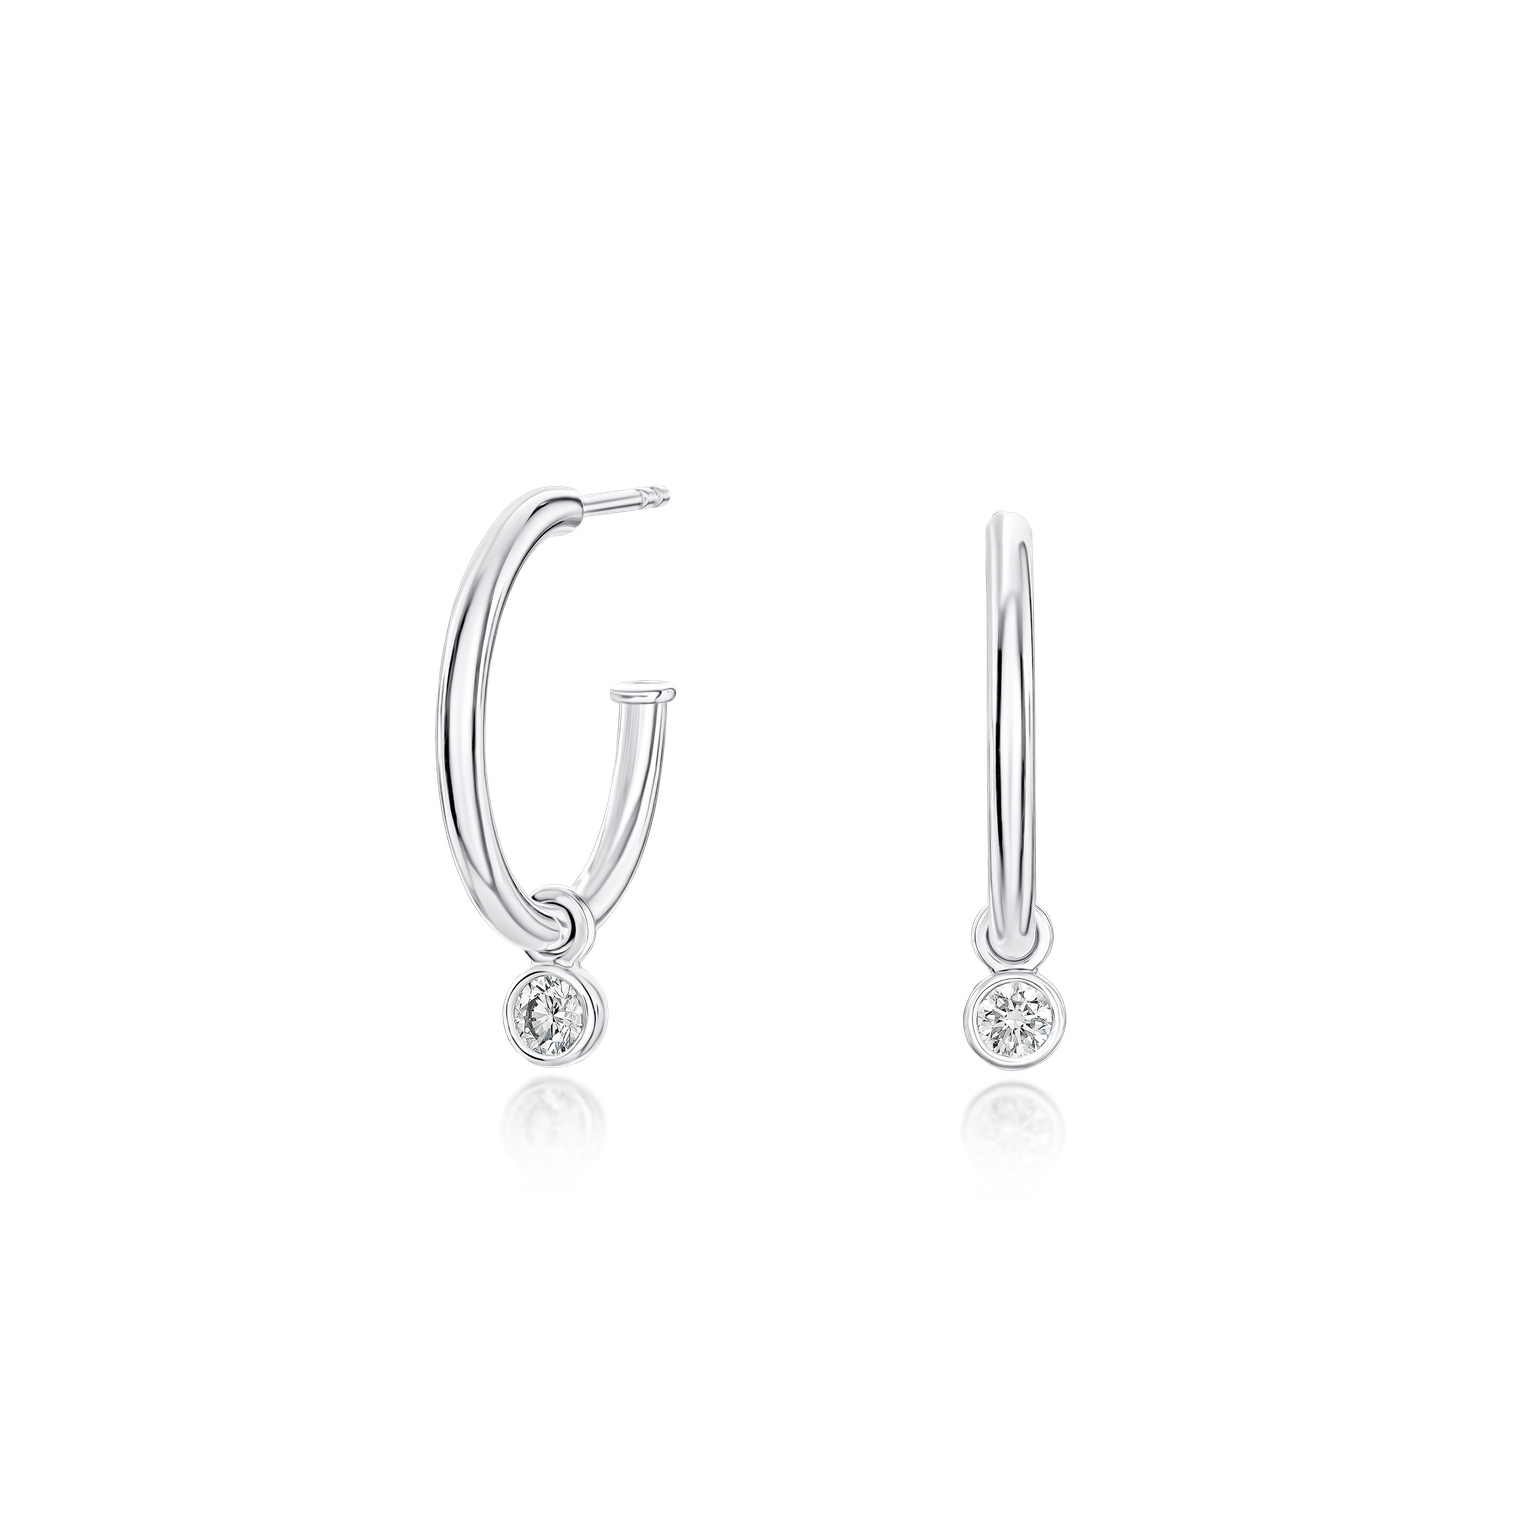 18ct White Gold Hoop Earrings with Diamond Drops